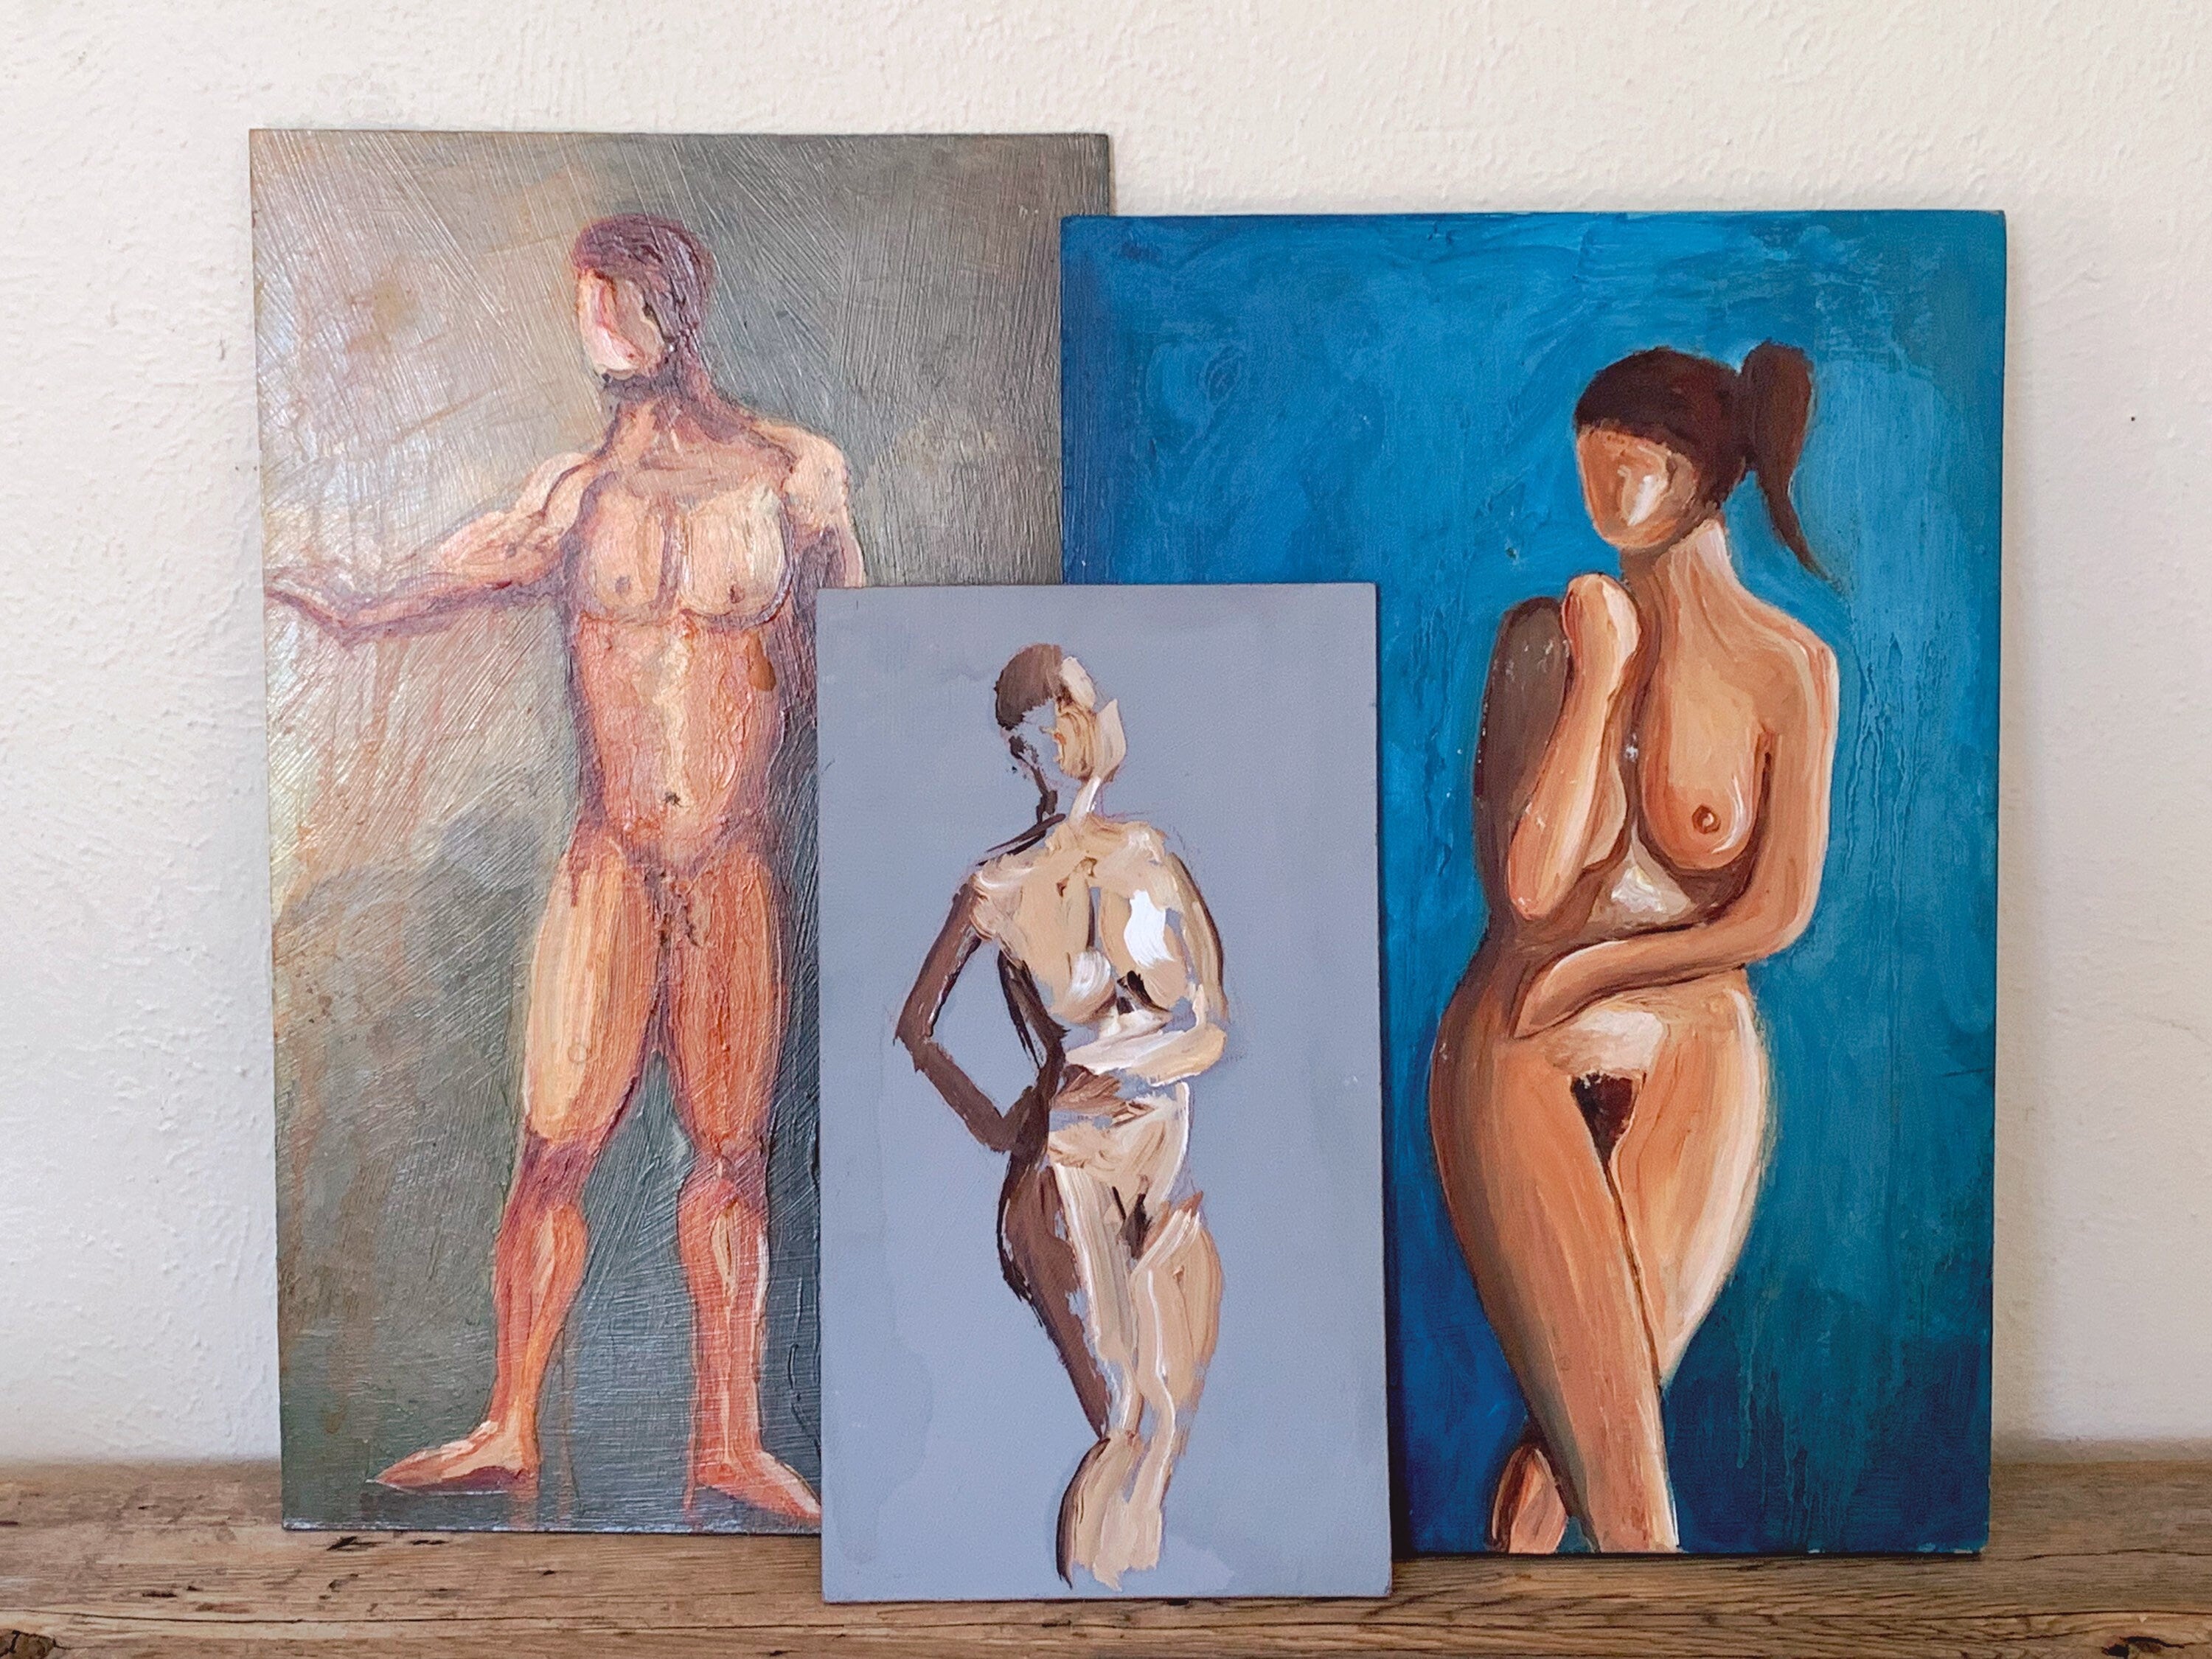 Original Oil Paintings of Nude Male and Female Figures | EACH SOLD SEPERATELY | Vintage Modernist Art Oil on Board | Home Decor Wall Art